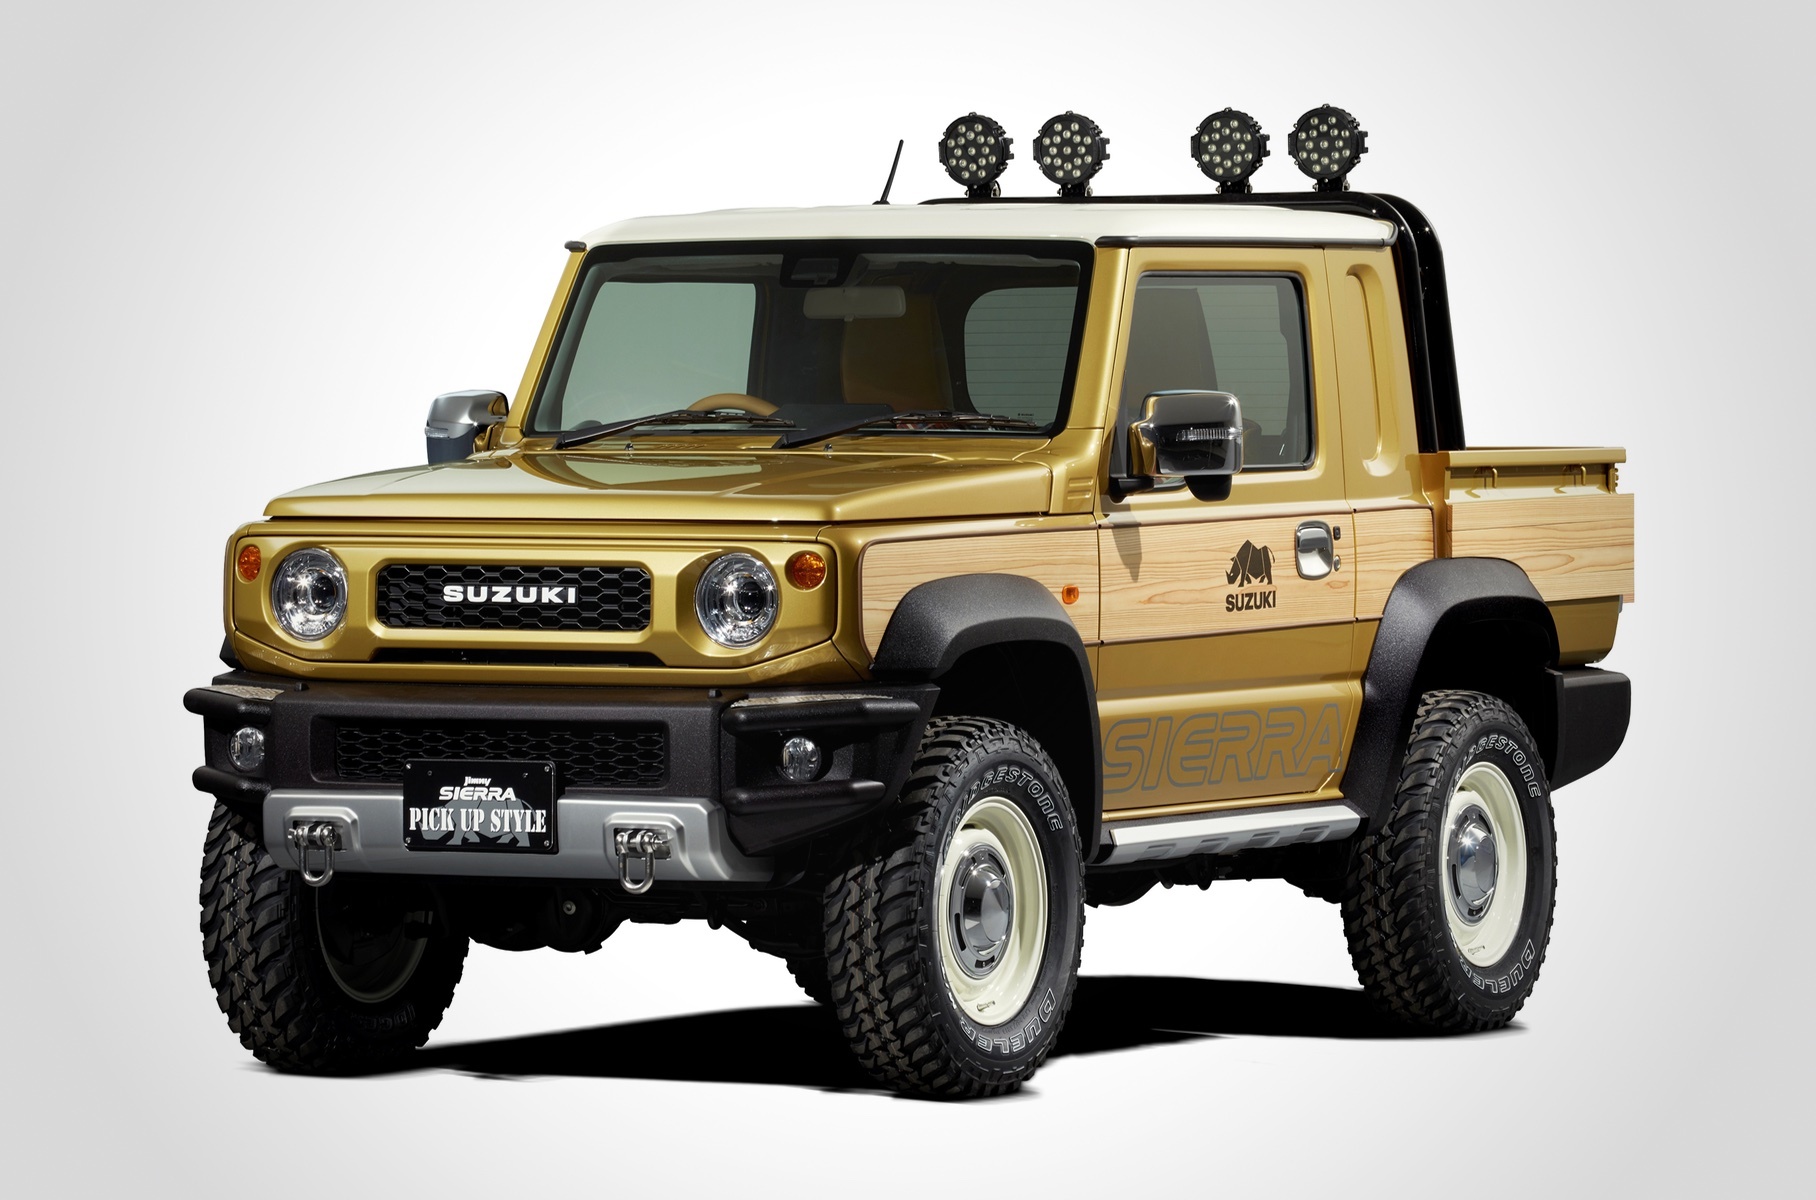 The Suzuki Jimny family will be replenished with a hybrid and a two-door pickup truck